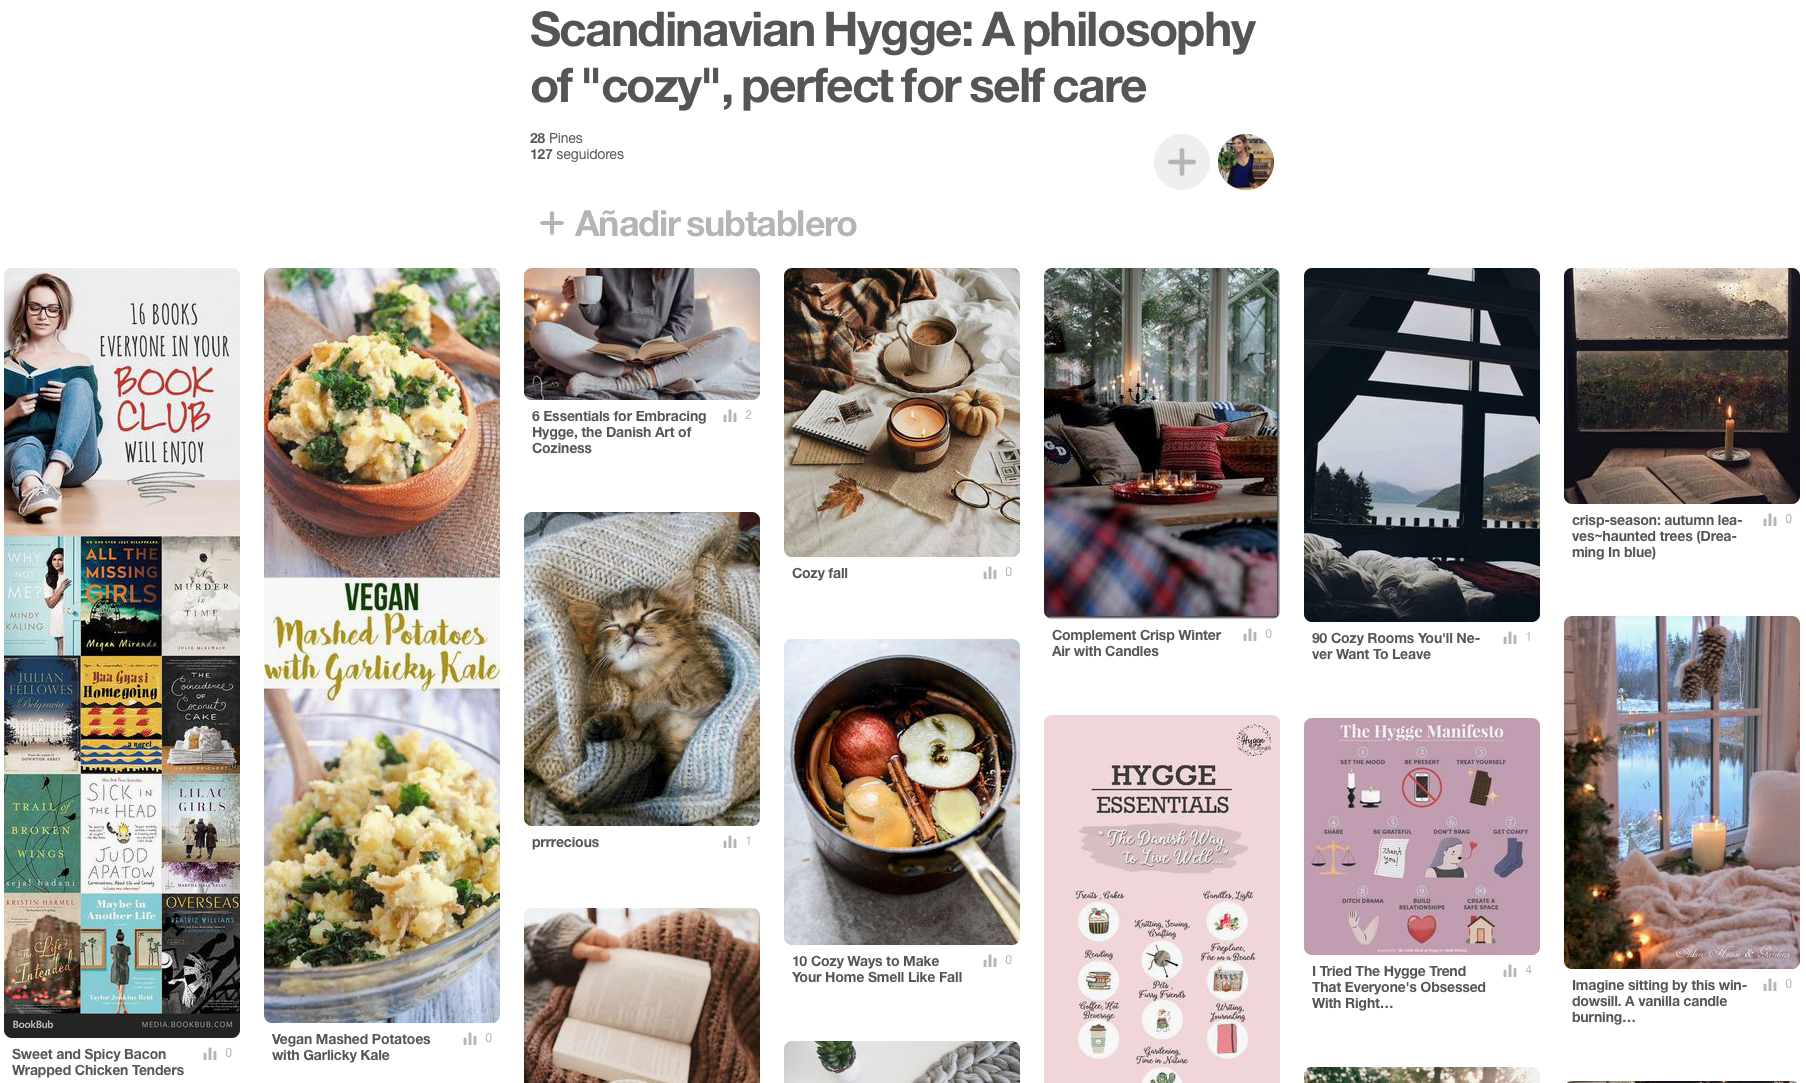 The ultimate Hygge guide, the Scandinavian philosophy of coziness ! A Hygge Pinterest board by Brownble